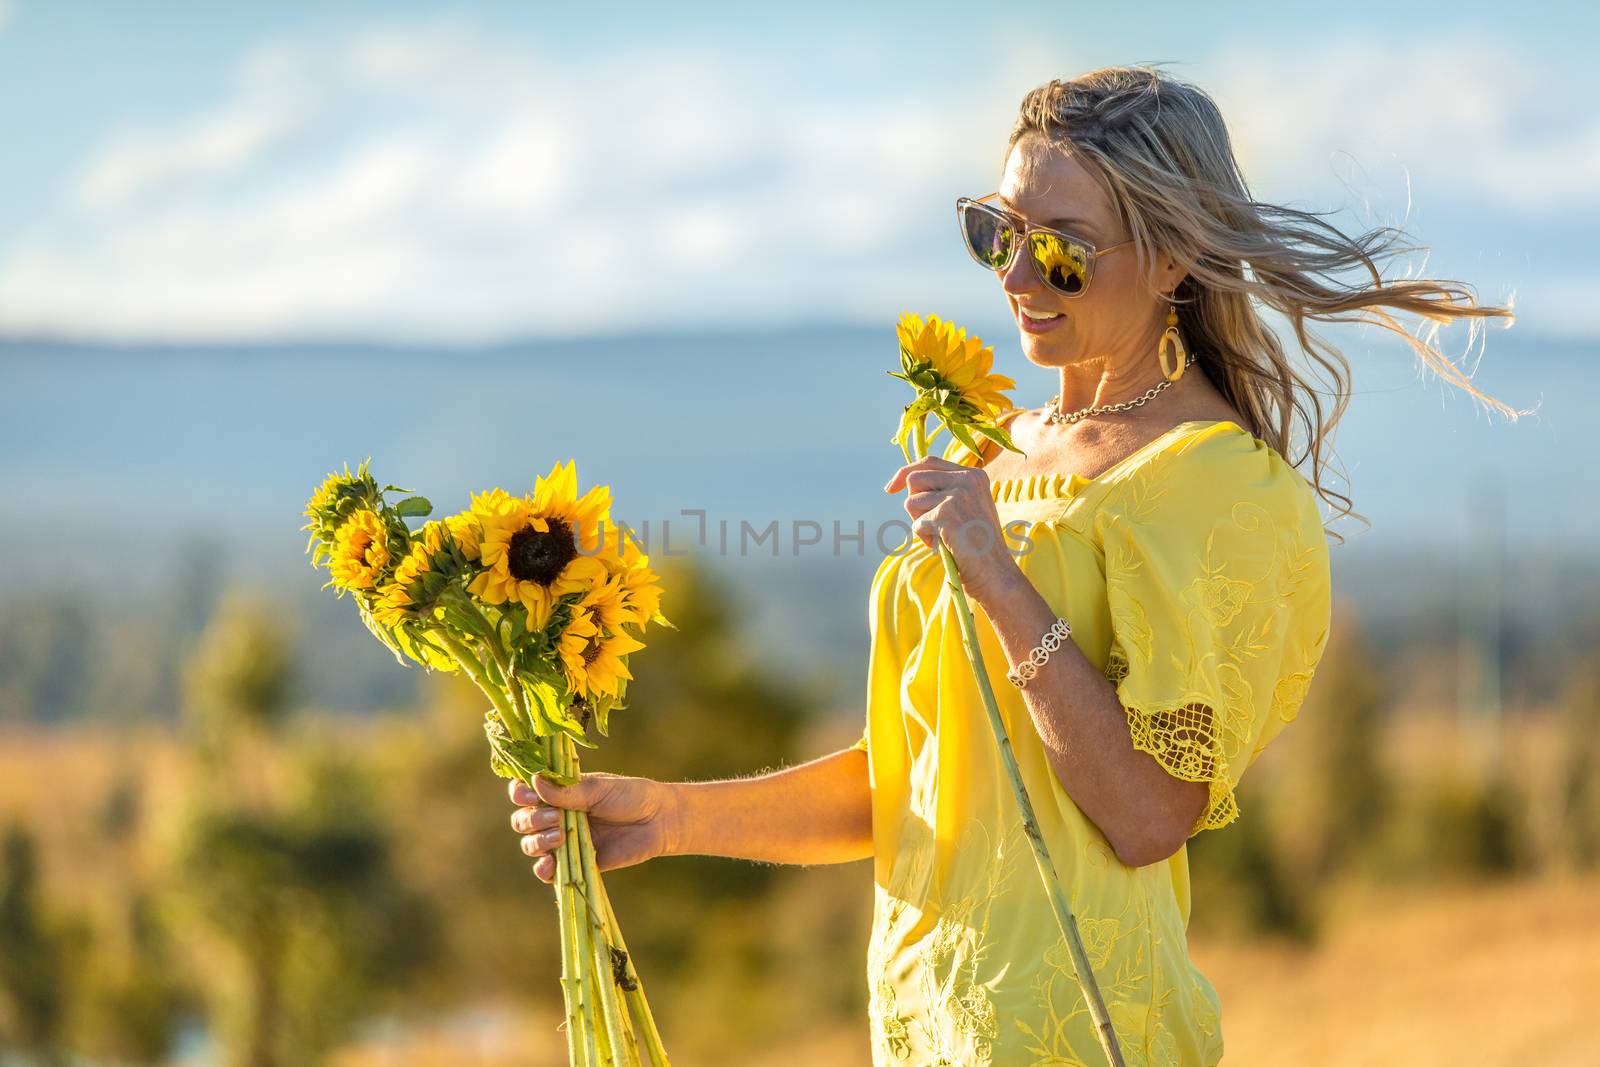 Happy woman holding bright yellow sunflowers, hair blowing in the wind in a rural landscape scene